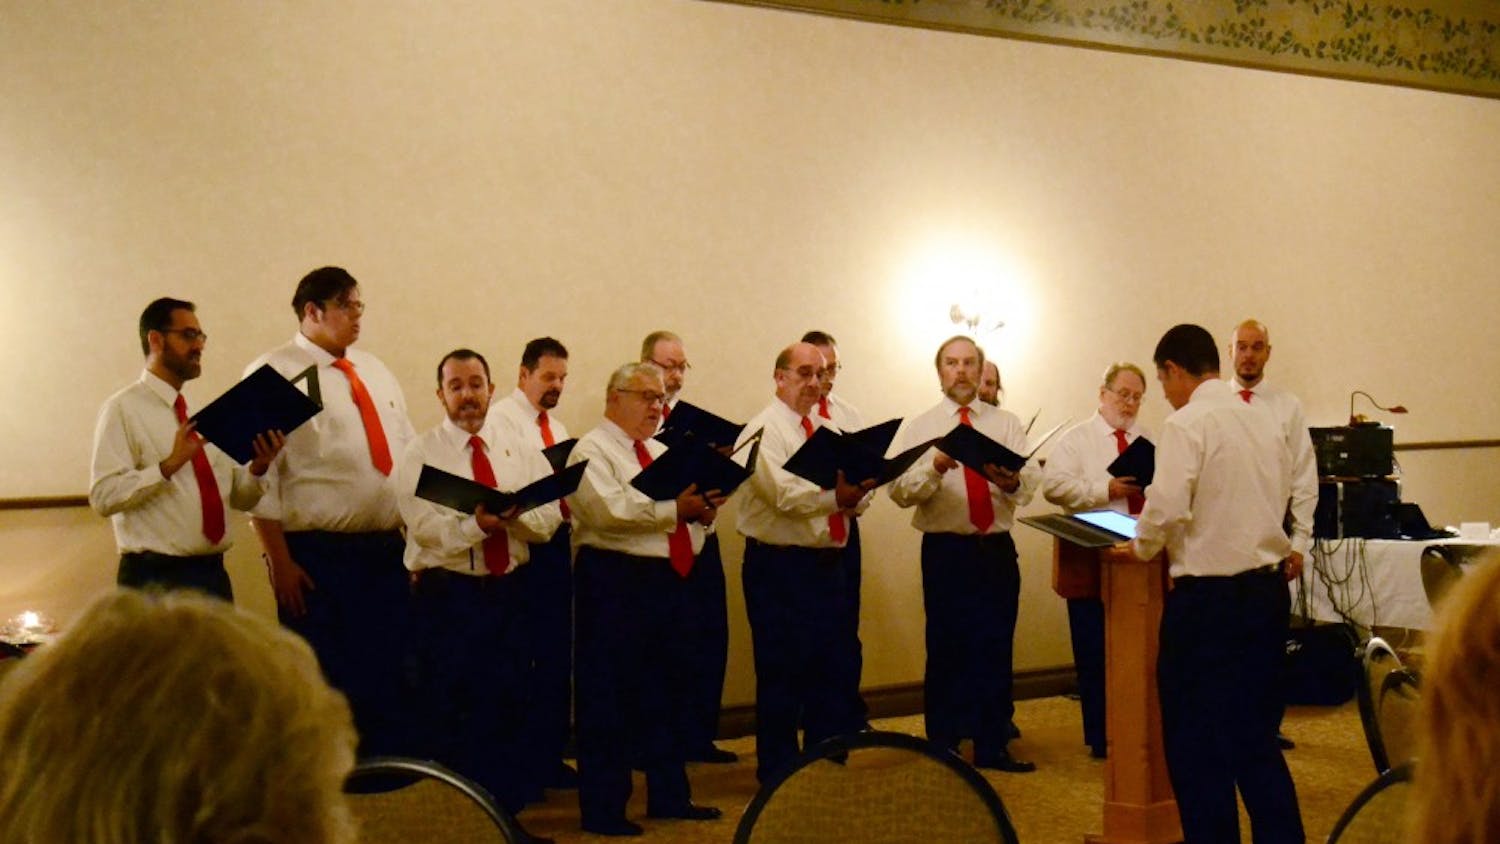 The Quarryland Men's Chorus performs at the World AIDS Day ceremony of remembrance in 2017. The 12th annual ceremony was presented Thursday evening by the Community AIDS Action Group of South Central Indiana.